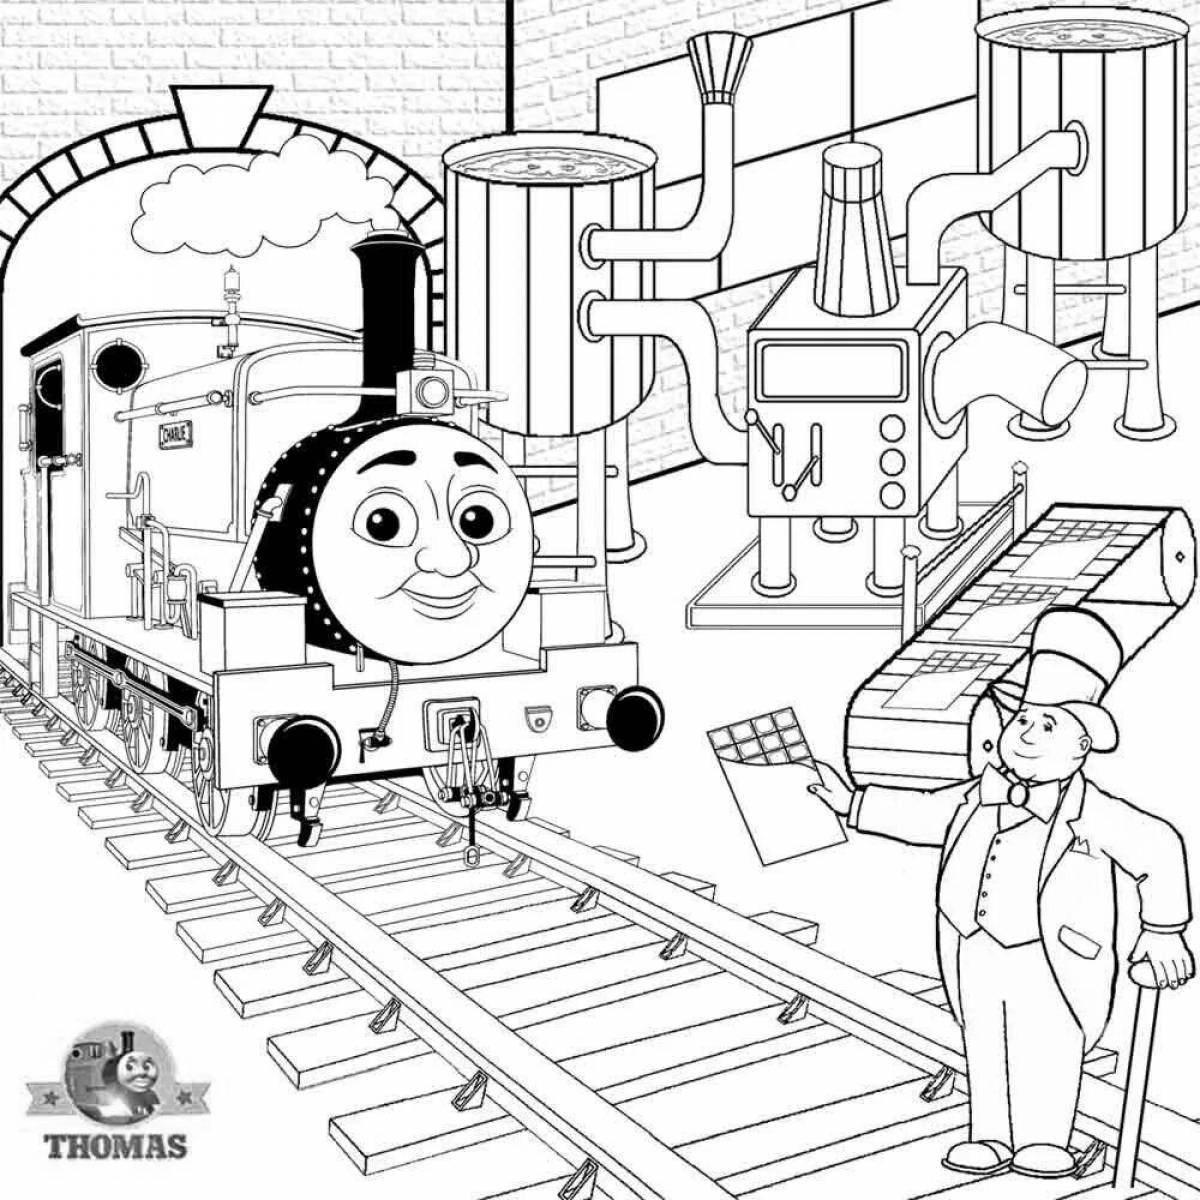 Charlie the engine #5